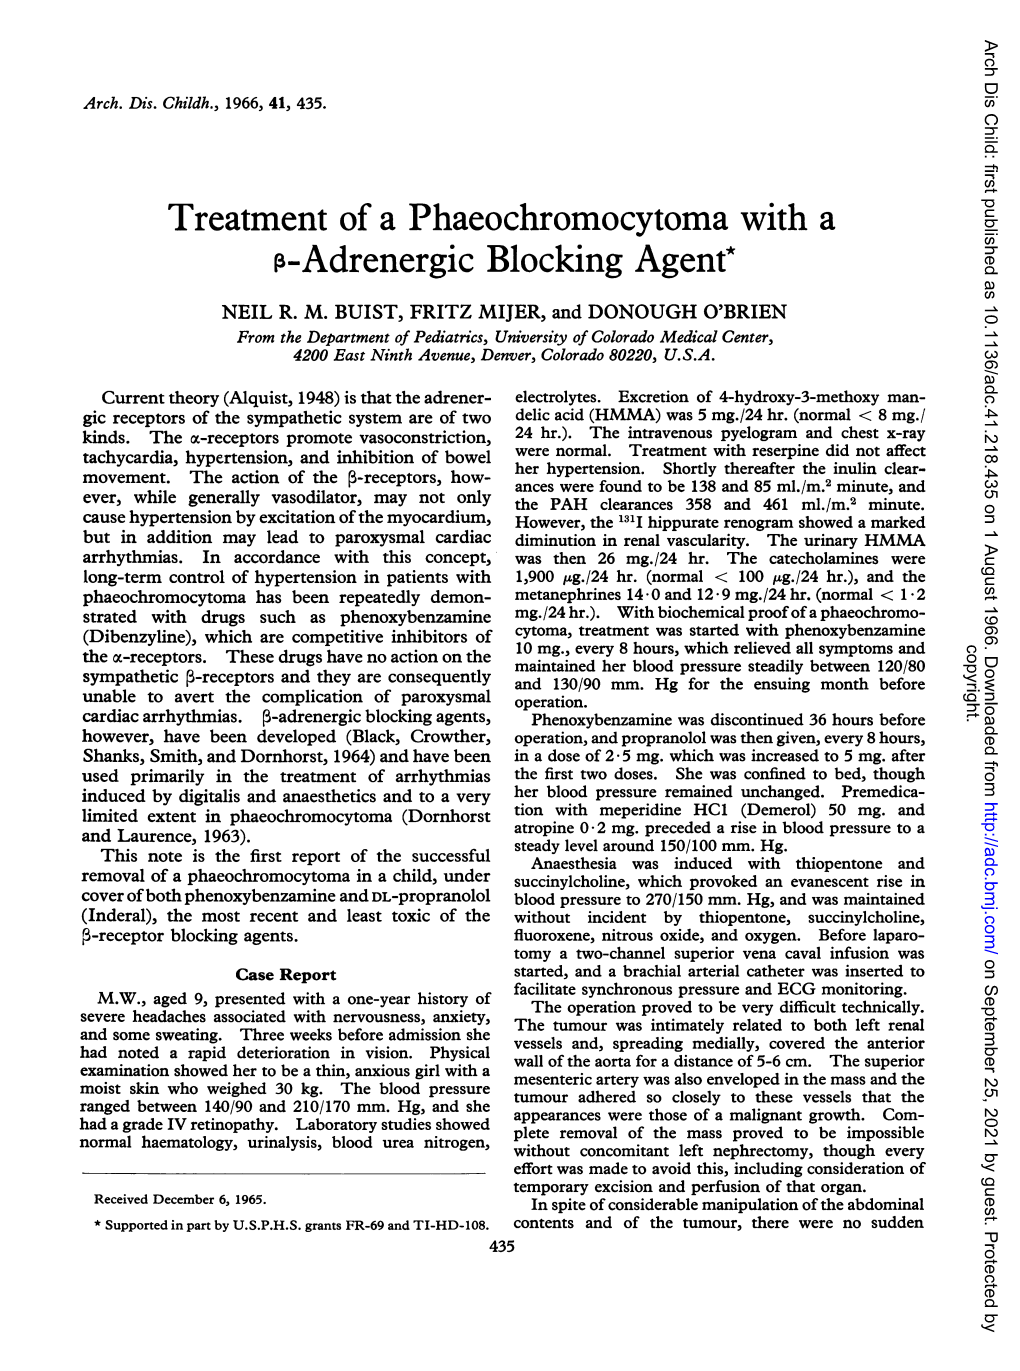 Treatment of a Phaeochromocytoma with a P-Adrenergic Blocking Agent* NEIL R